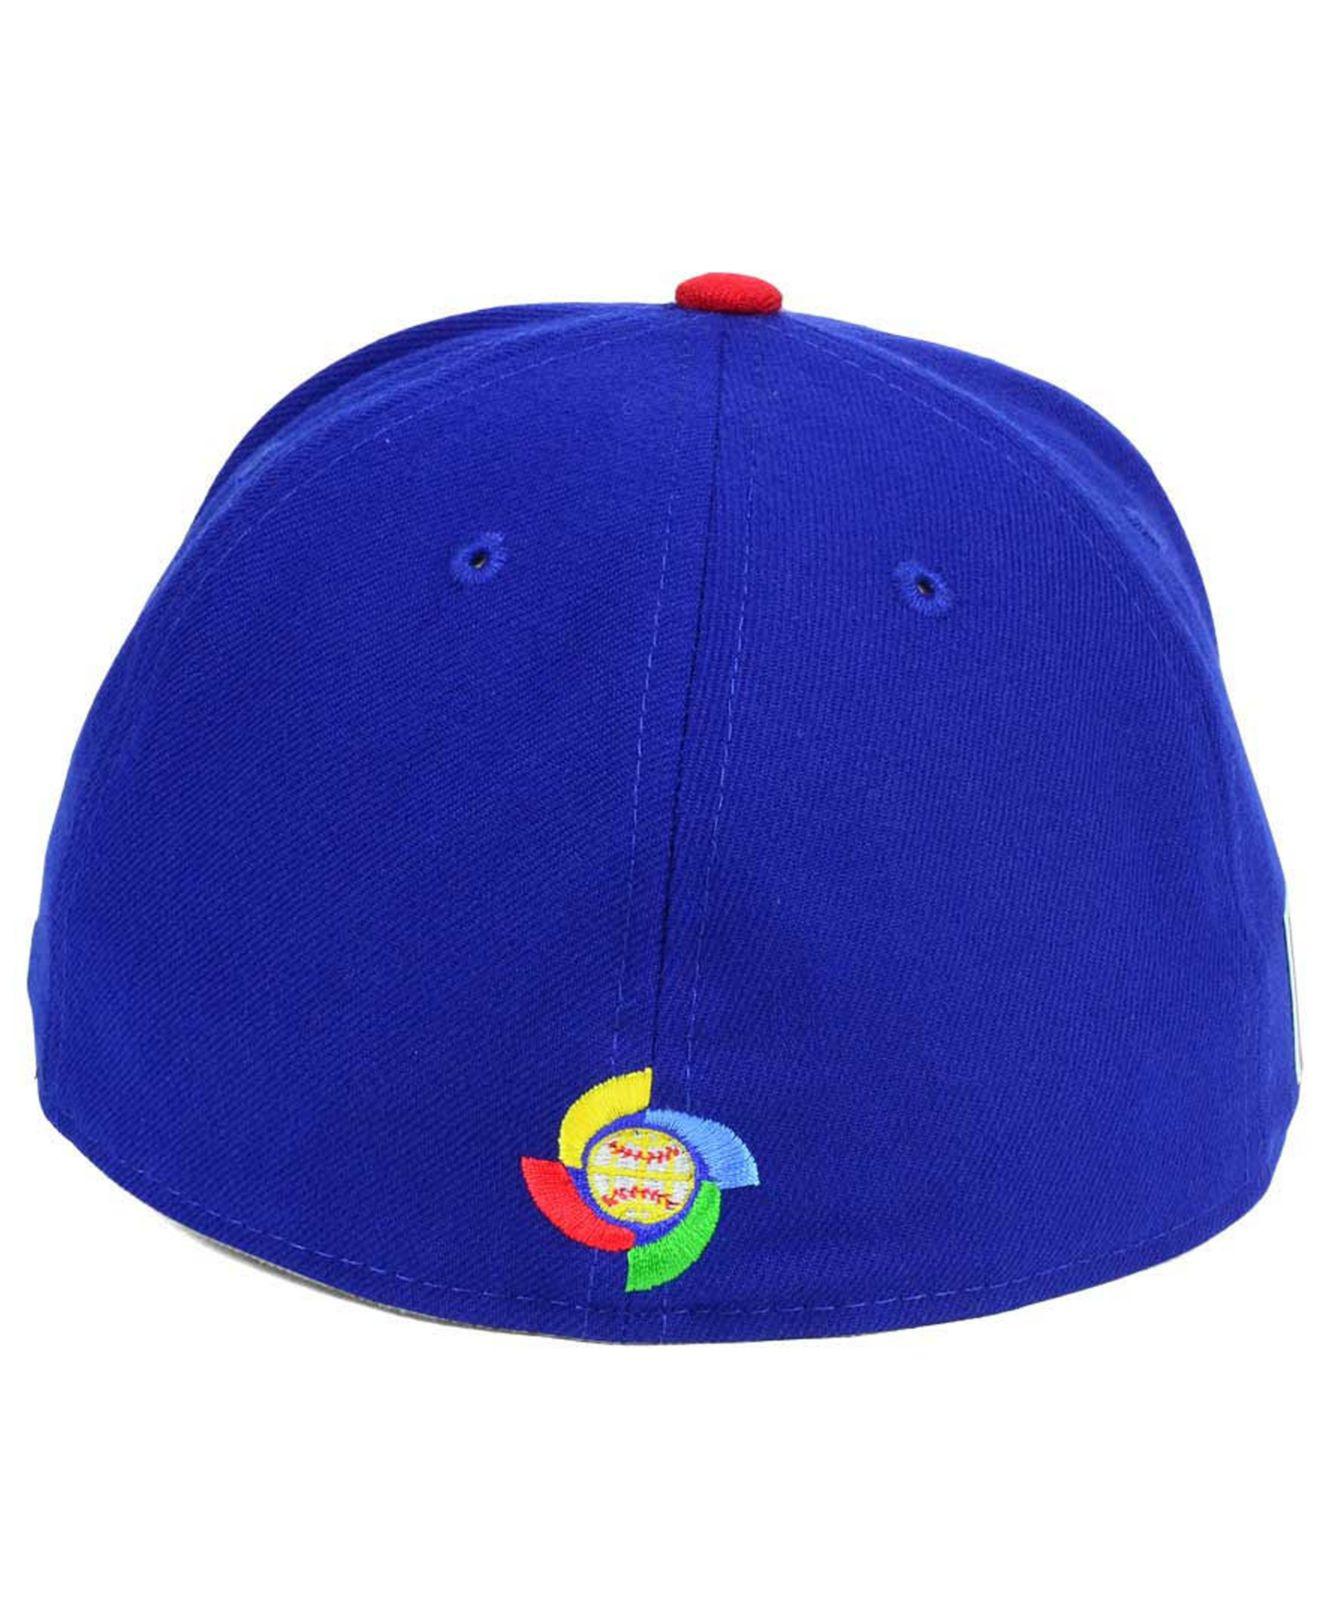 KTZ Puerto Rico World Baseball Classic 59fifty Fitted Cap in Blue for Men